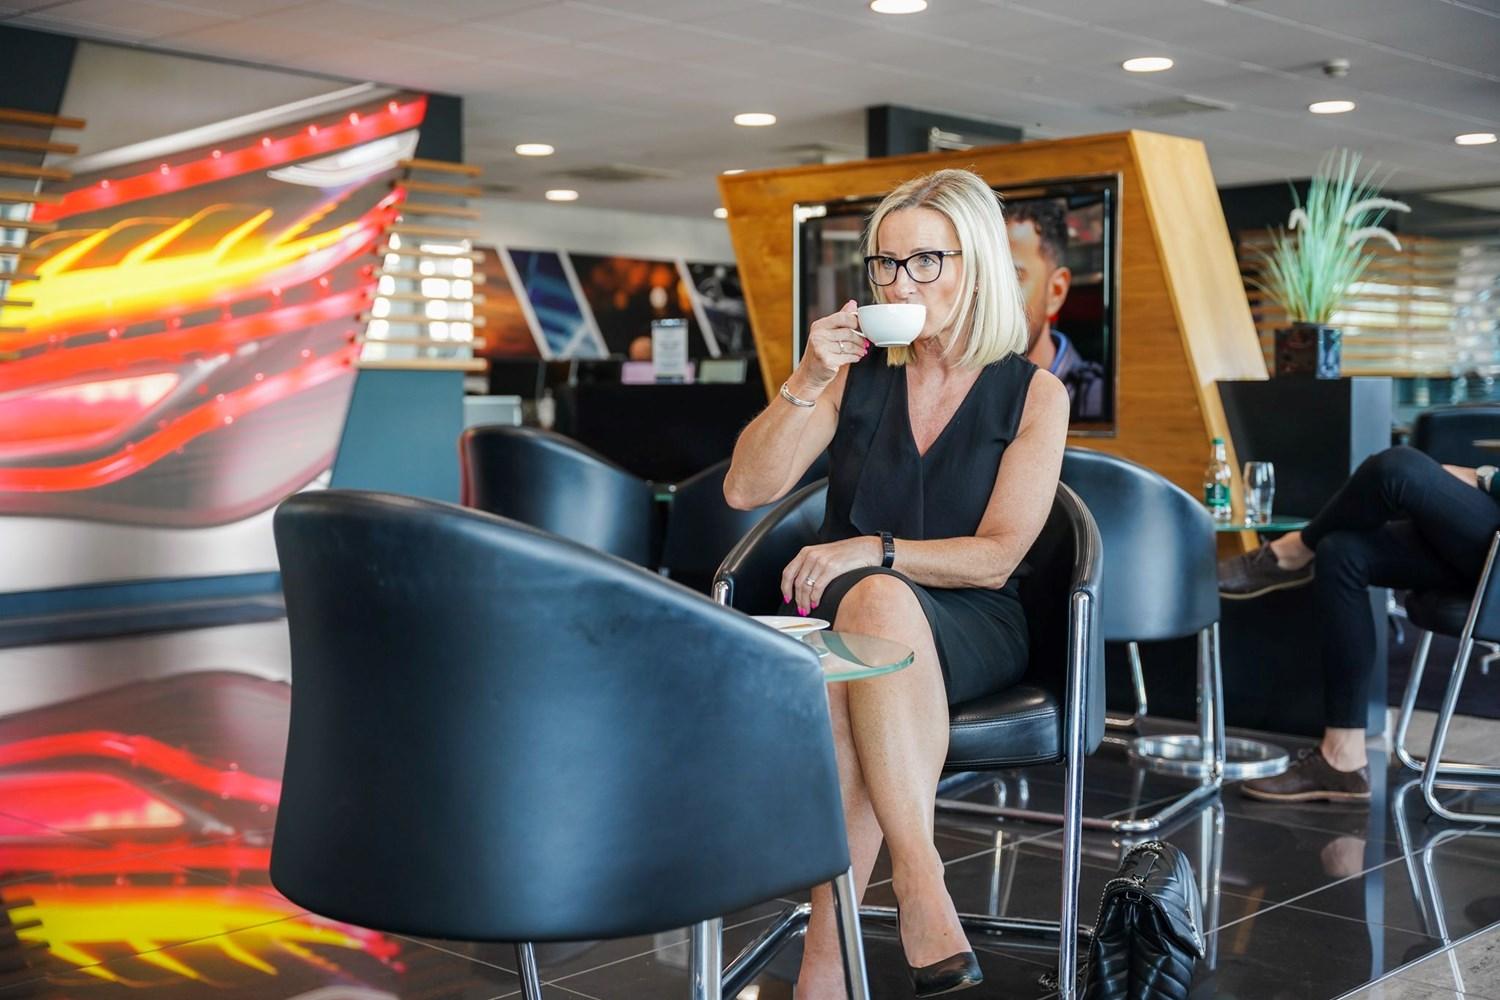 Mercedes-Benz customer enjoys a cup of coffee while they wait at the Mercedes-Benz of Belfast showroom